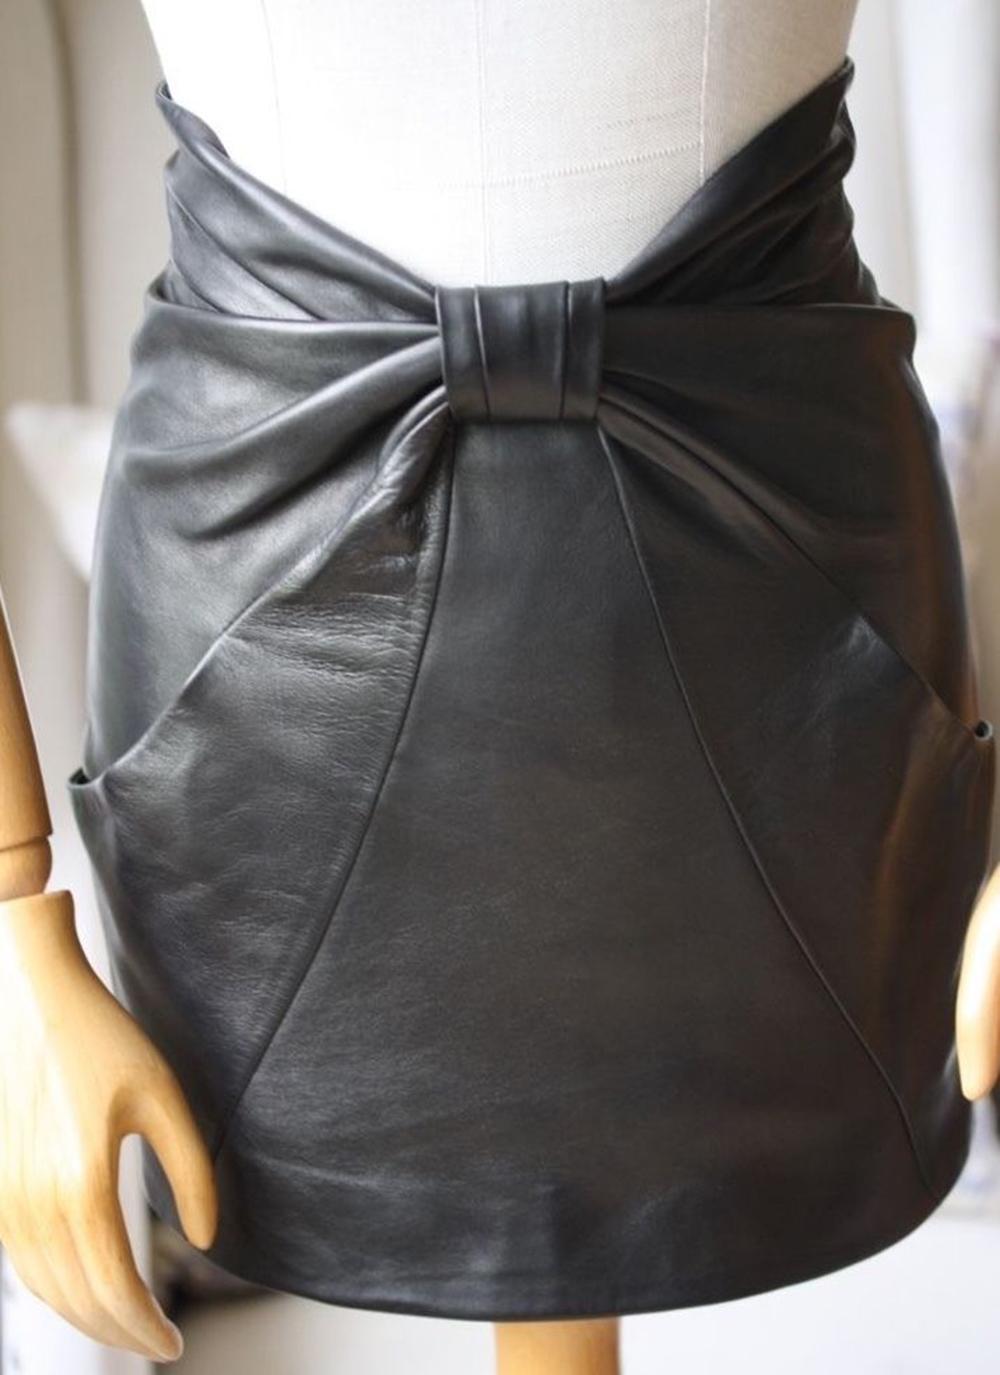 Black lamb’s leather skirt with large leather bow at front from Balmain. Bow makes up both the front of the garment and the two hip pockets. Long gunmetal tone zipper at rear. Fully lined in black cotton-blend. Darts for shaping at front and rear.